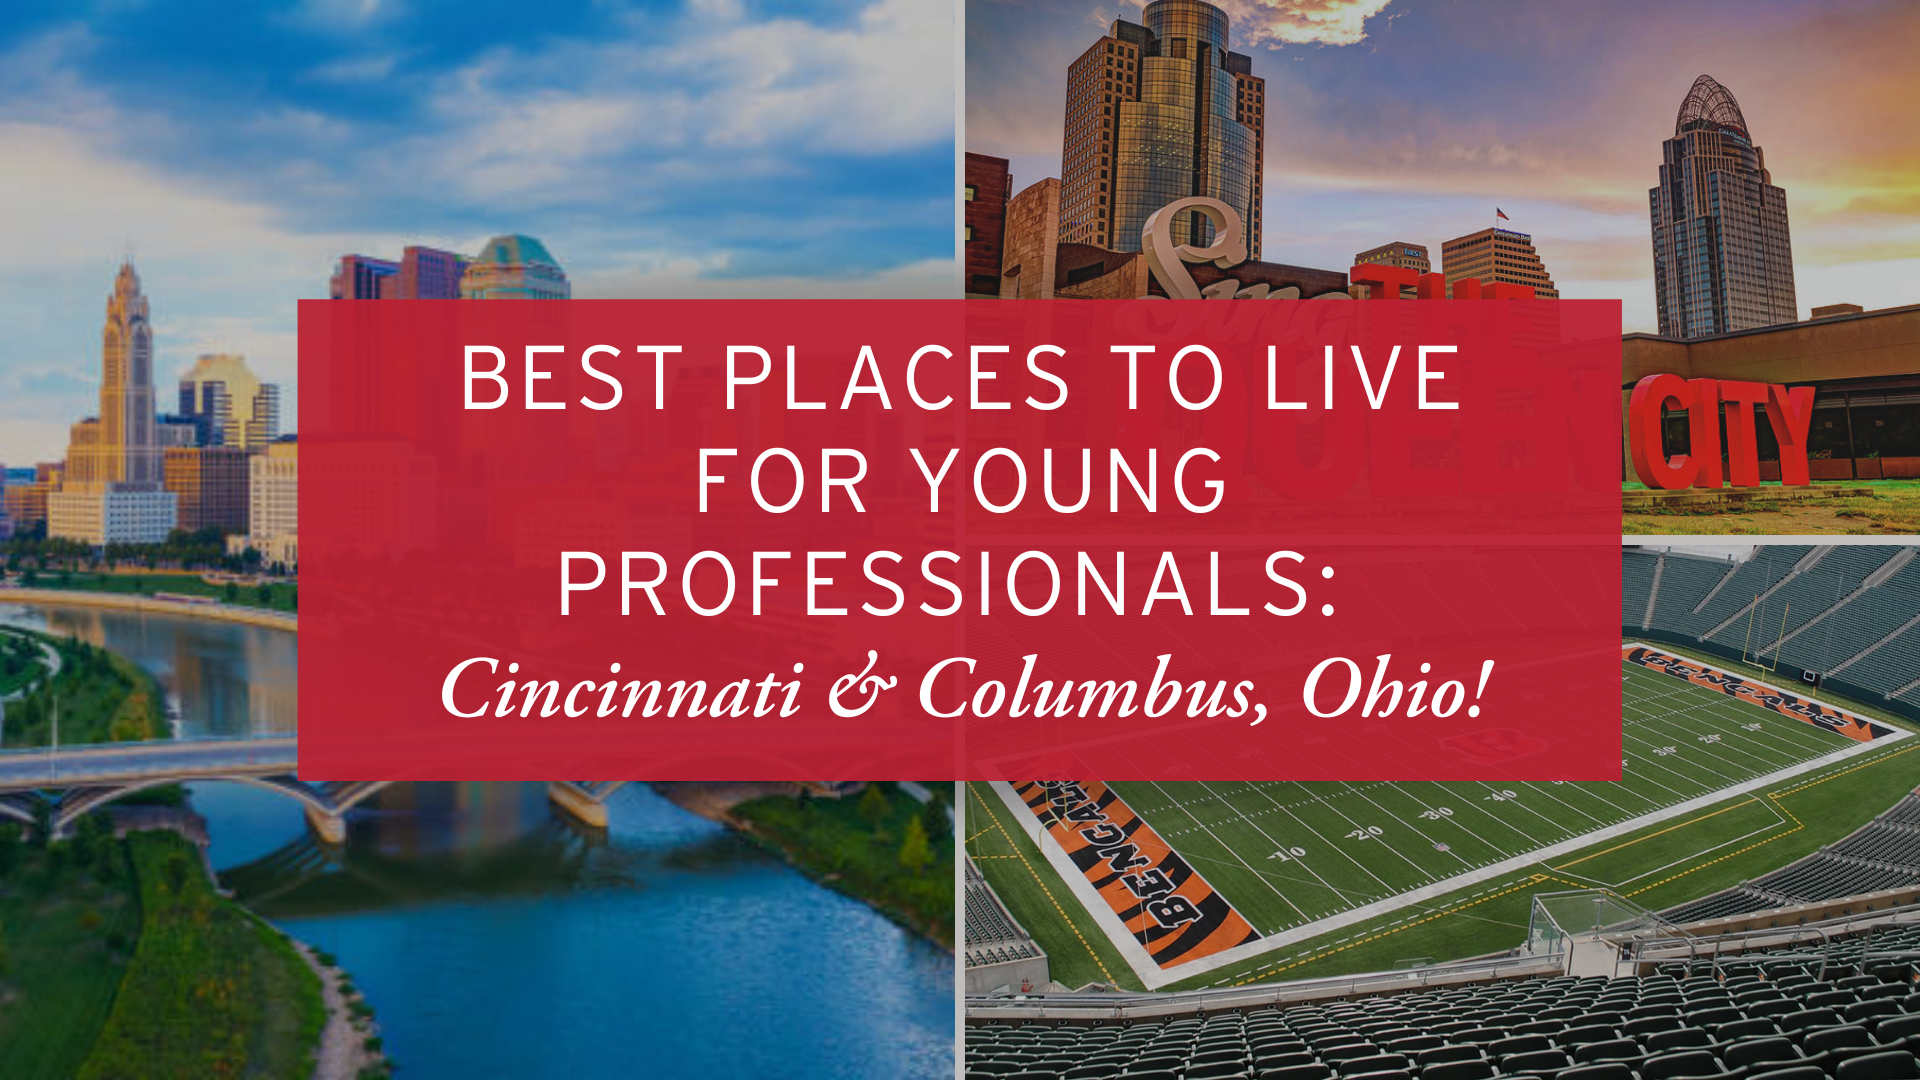 Best Places to Live for Young Professionals - Cincinnati & Columbus, OH!